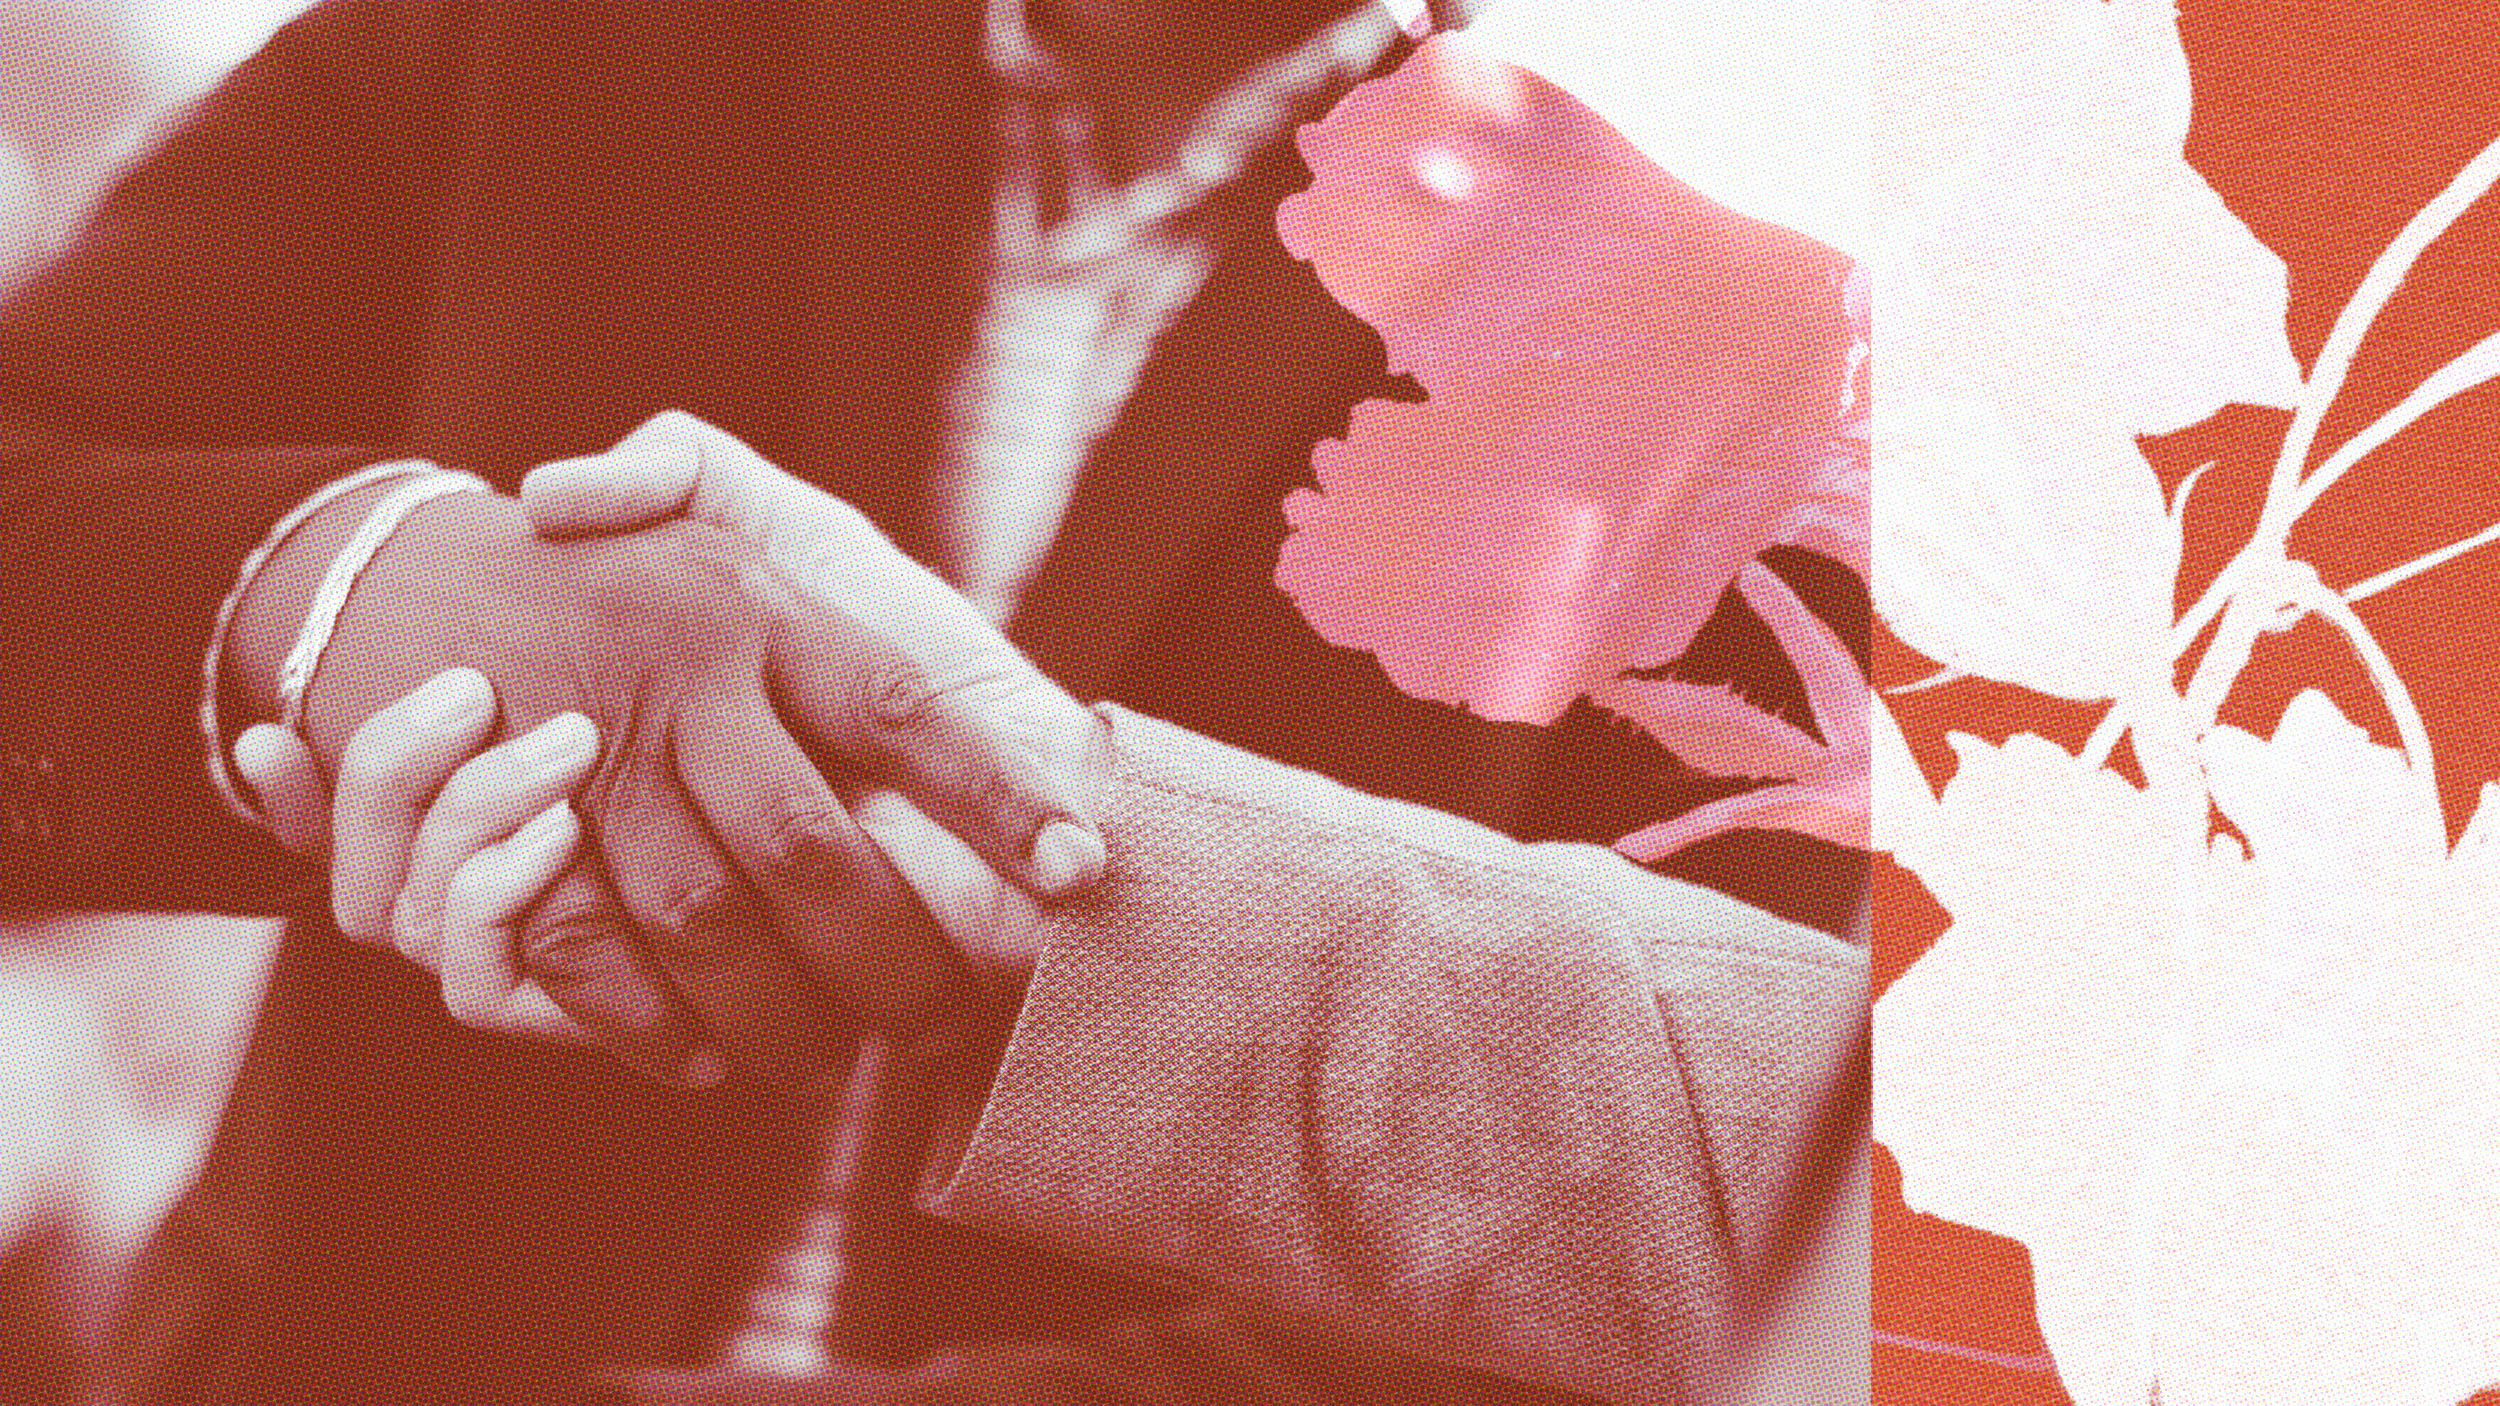 Two people shaking hands, with one wearing a suit. The image is overlaid with red and white floral patterns, symbolizing radical respect.